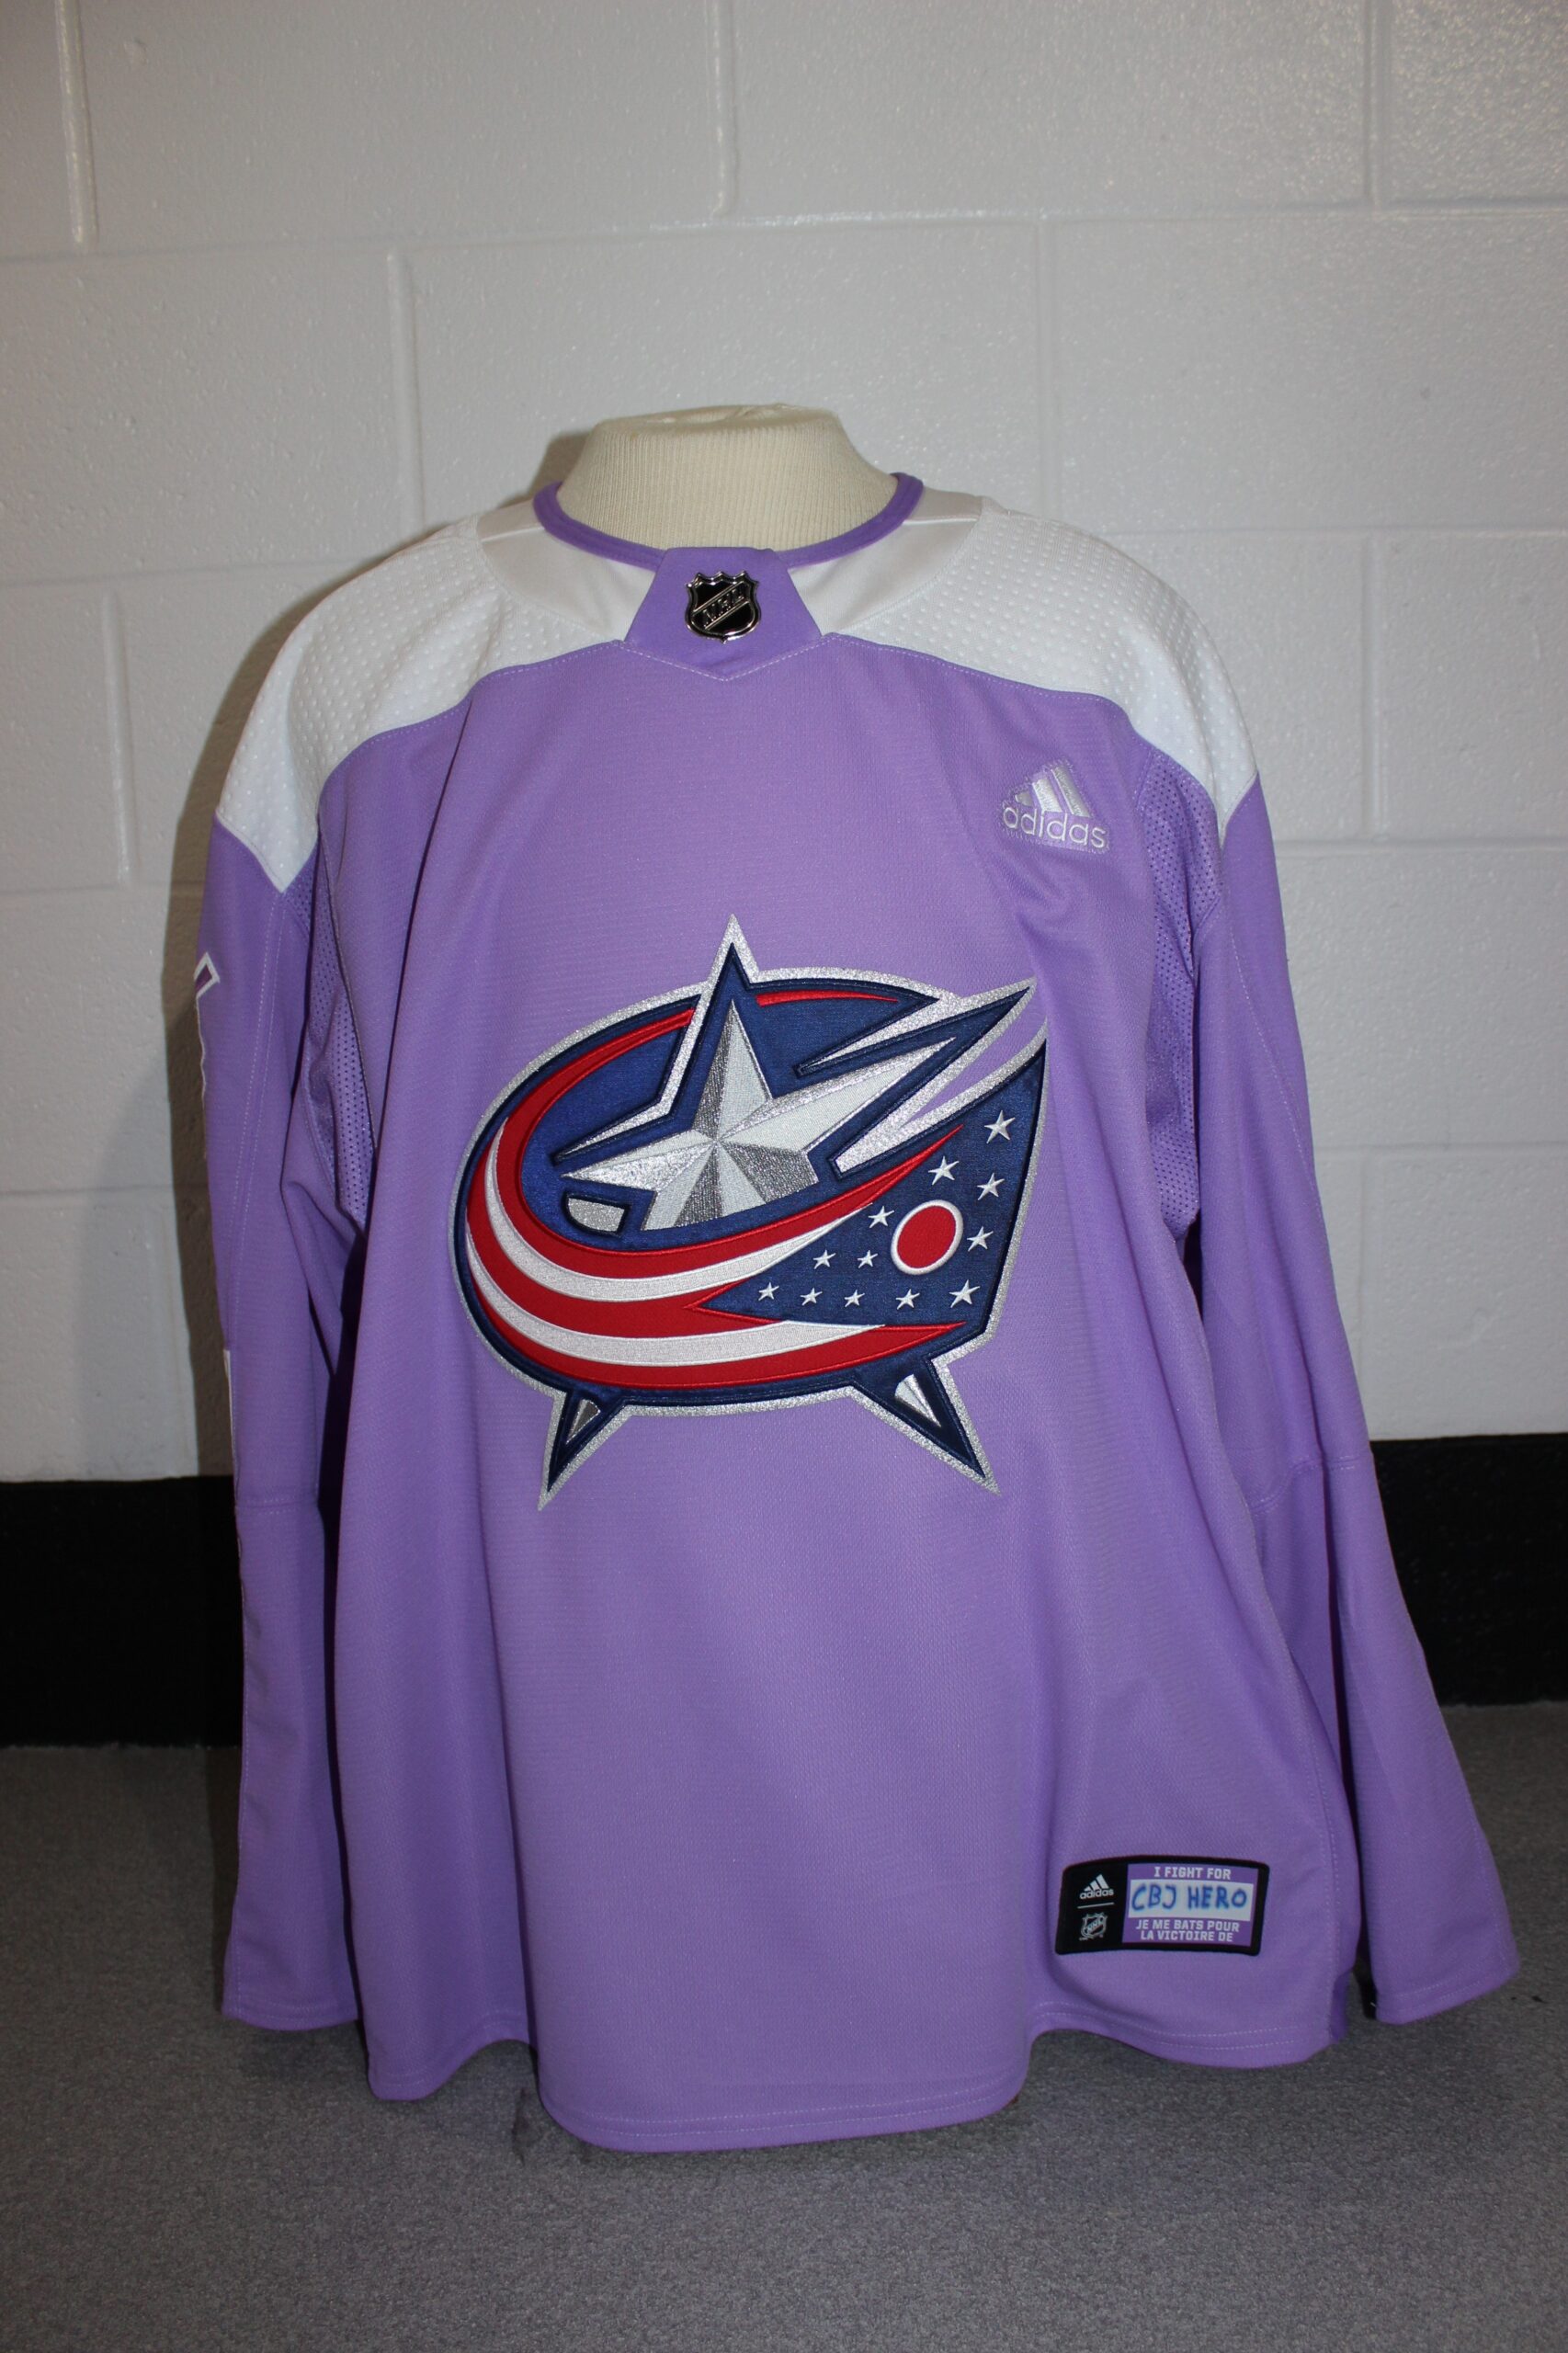 Special Jersey Auction